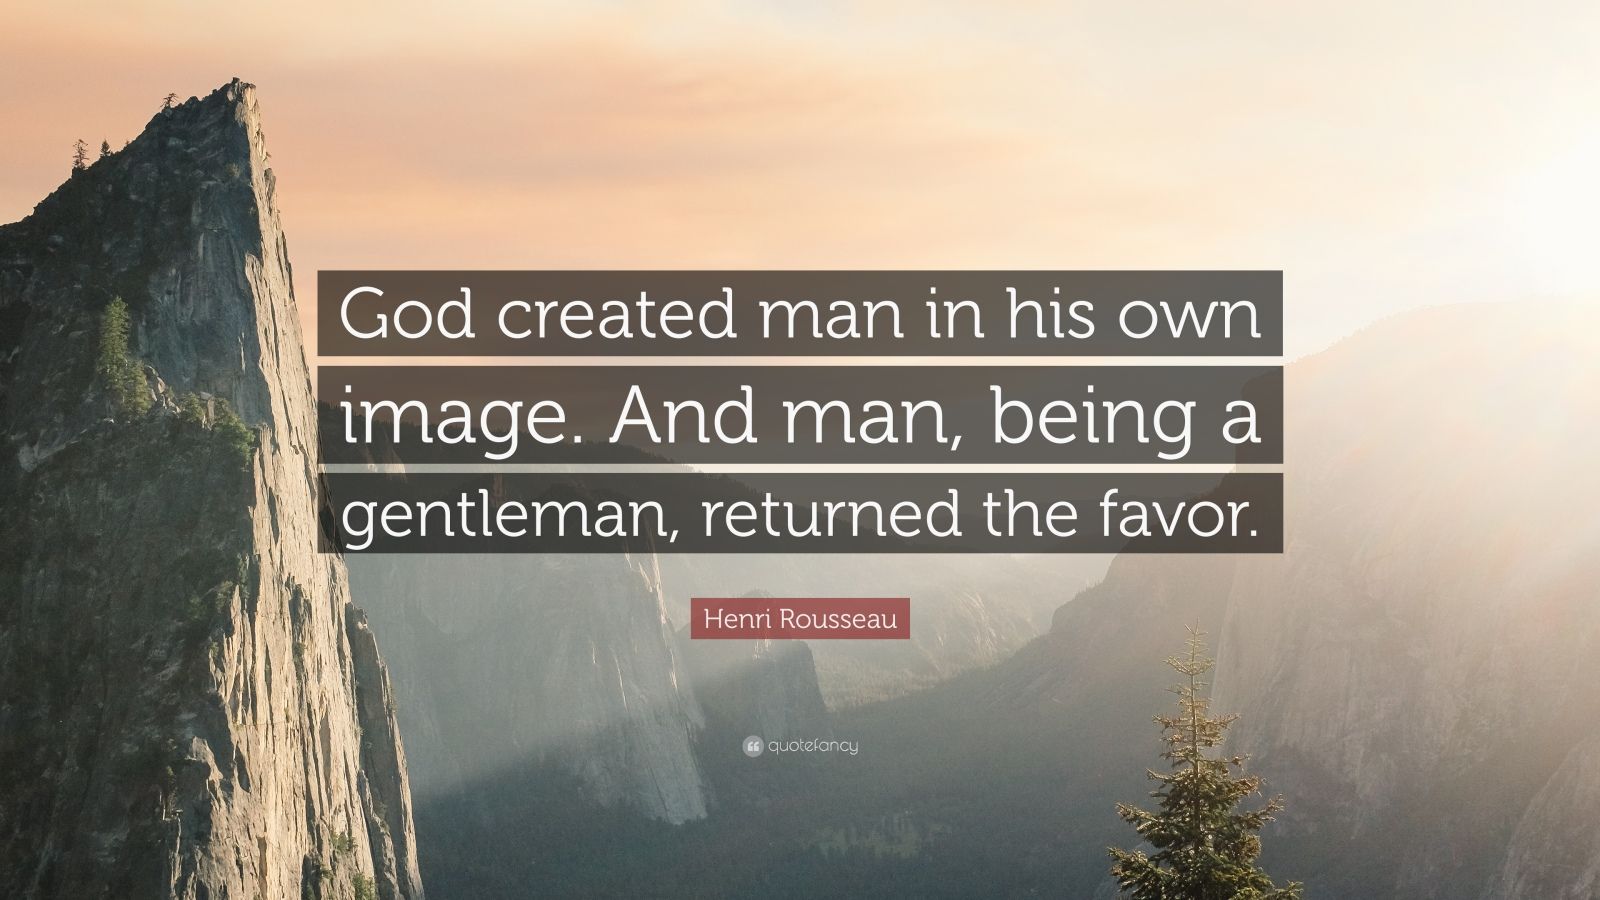 Henri Rousseau Quote: “God created man in his own image. And man, being